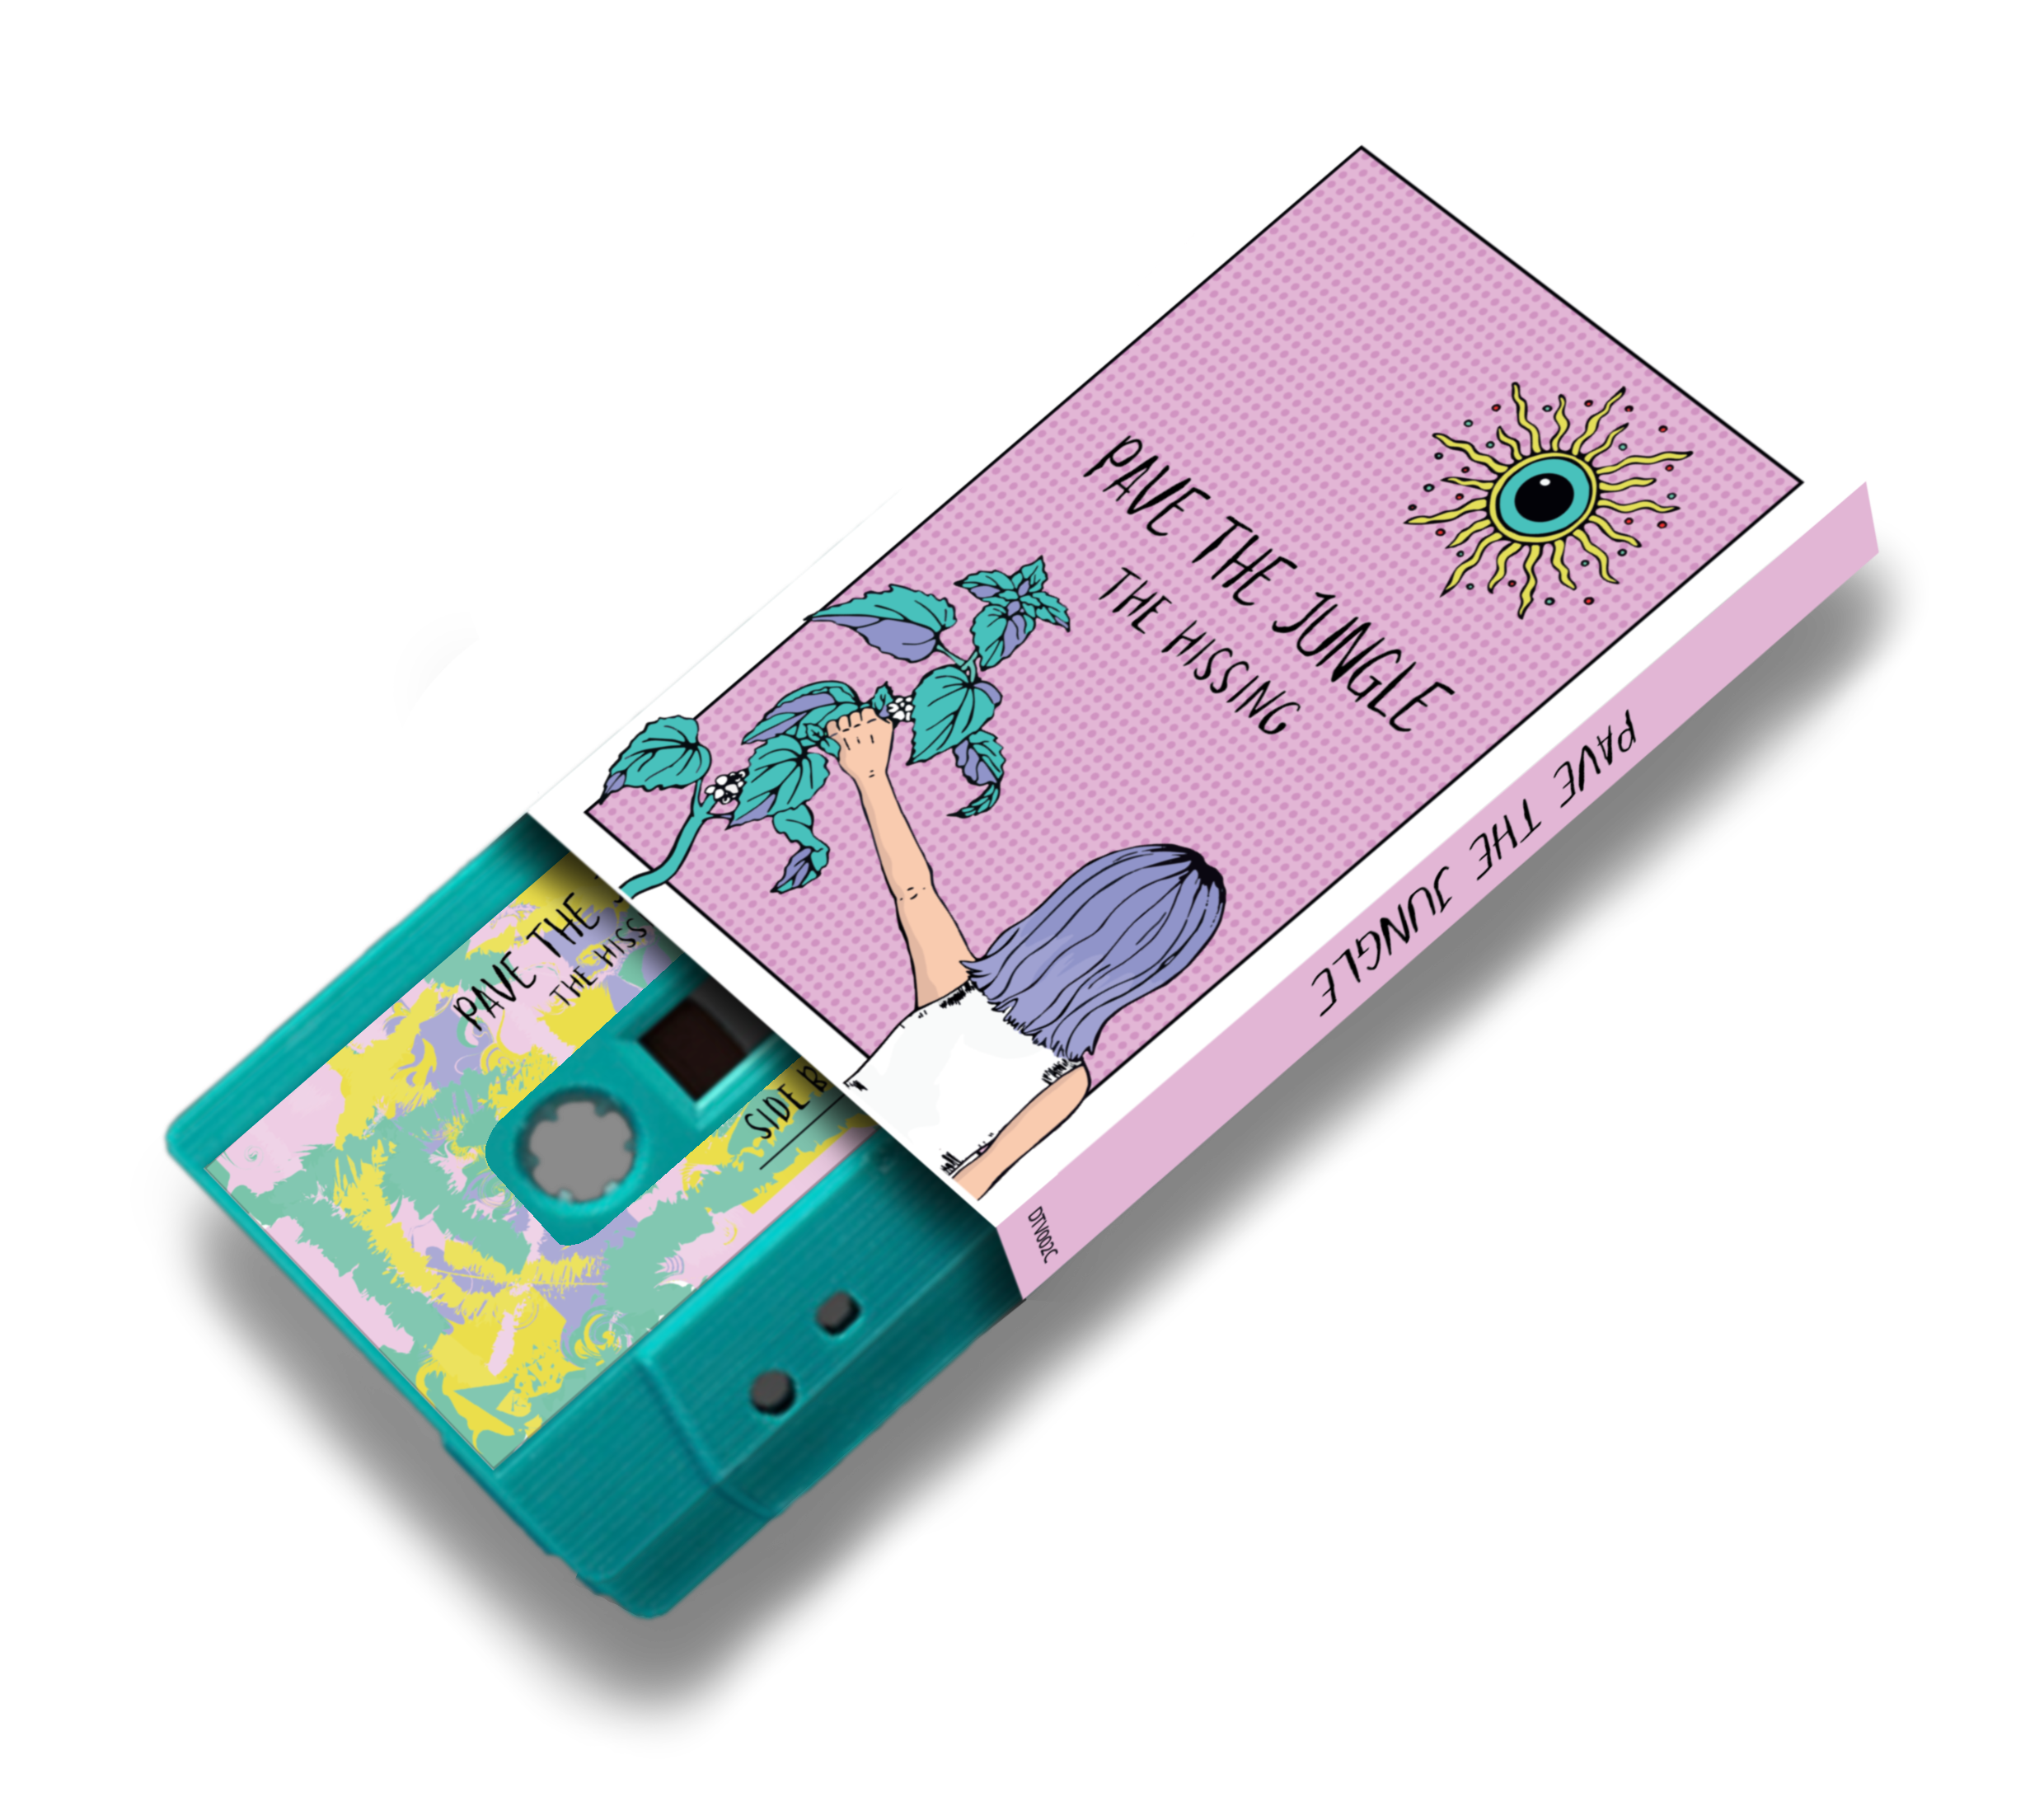 Pave The Jungle - ‘The Hissing’ Ltd Edition Cassette Mini Zine Duo - turquoise